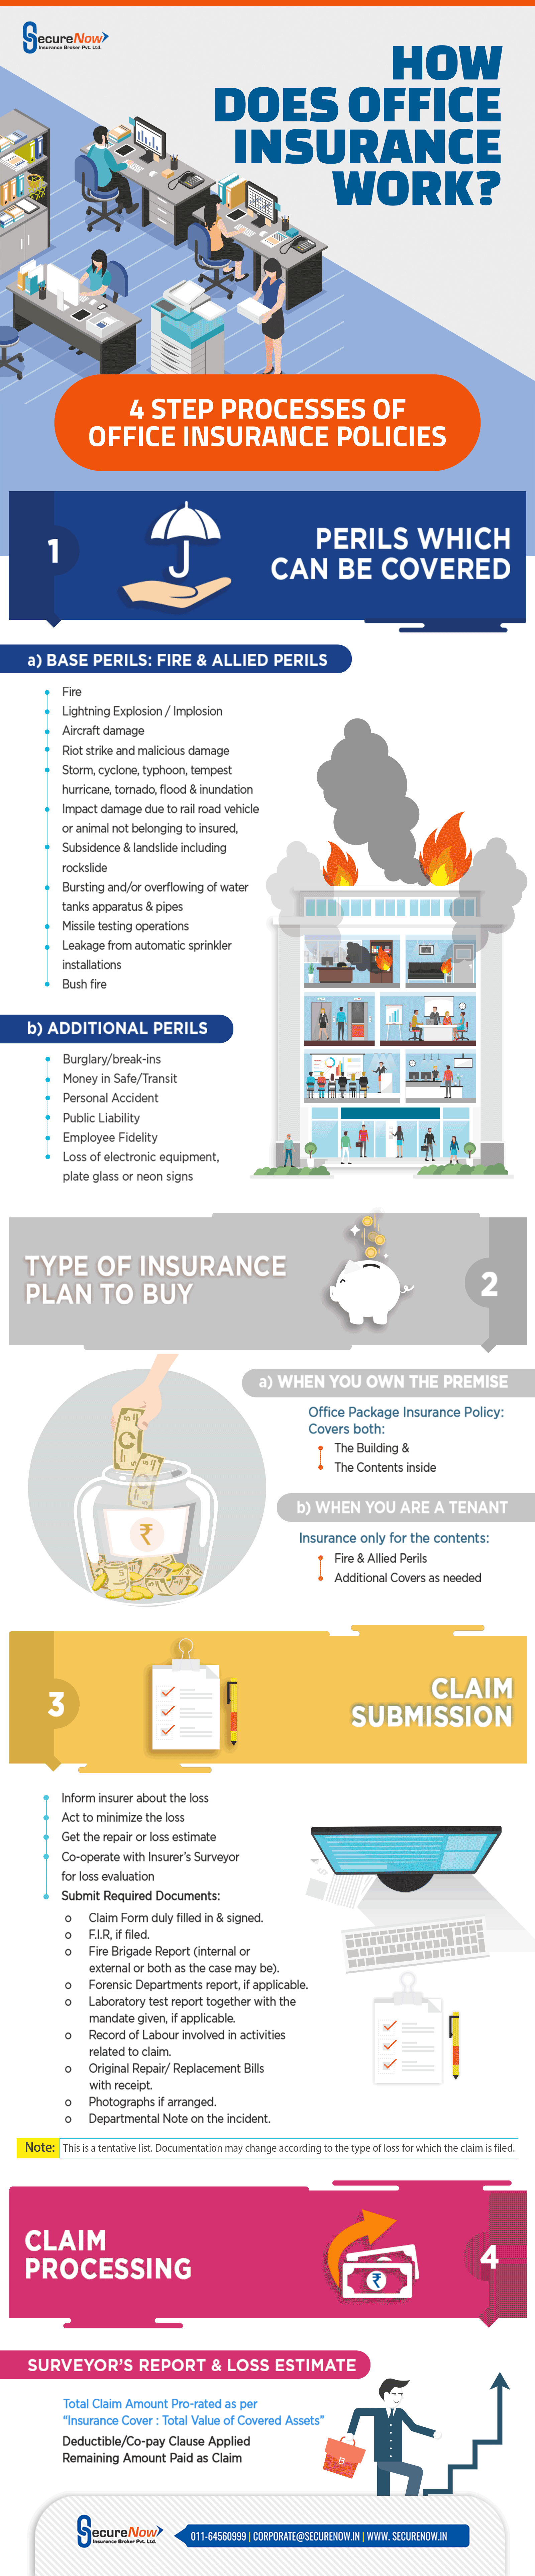 How Does Office Insurance Policy Work?